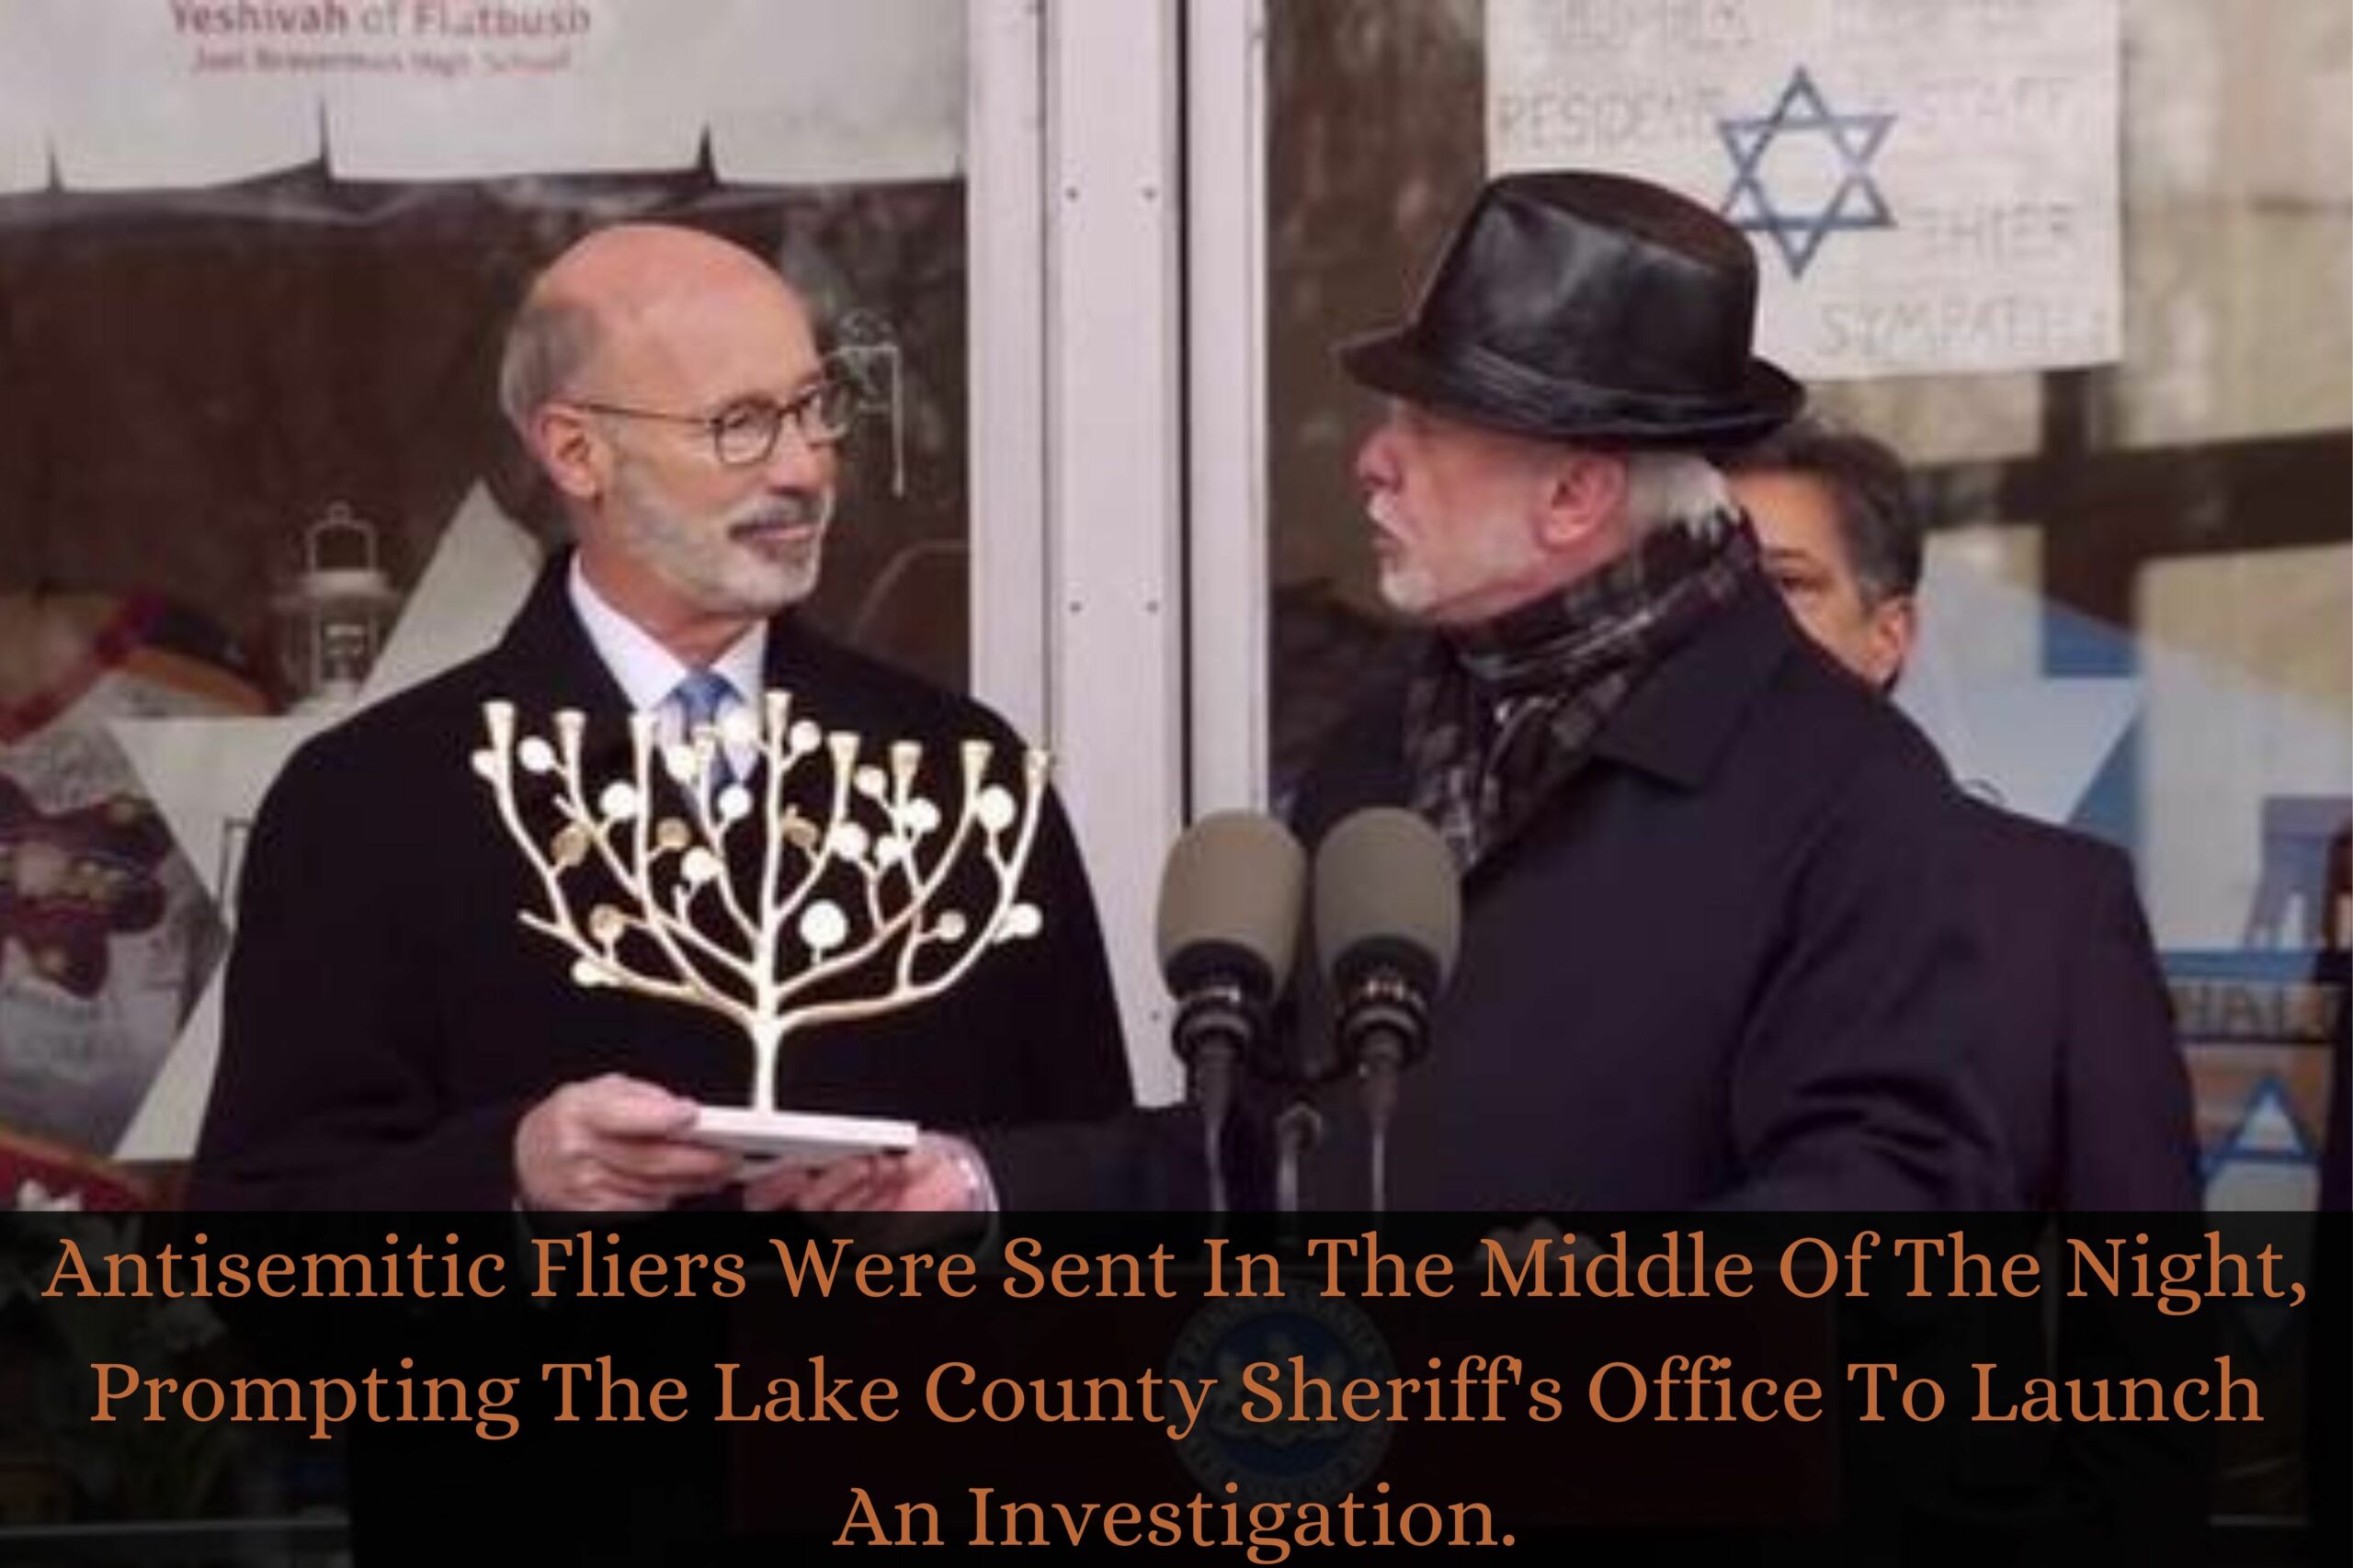 Antisemitic Fliers Were Sent In The Middle Of The Night, Prompting The Lake County Sheriff's Office To Launch An Investigation